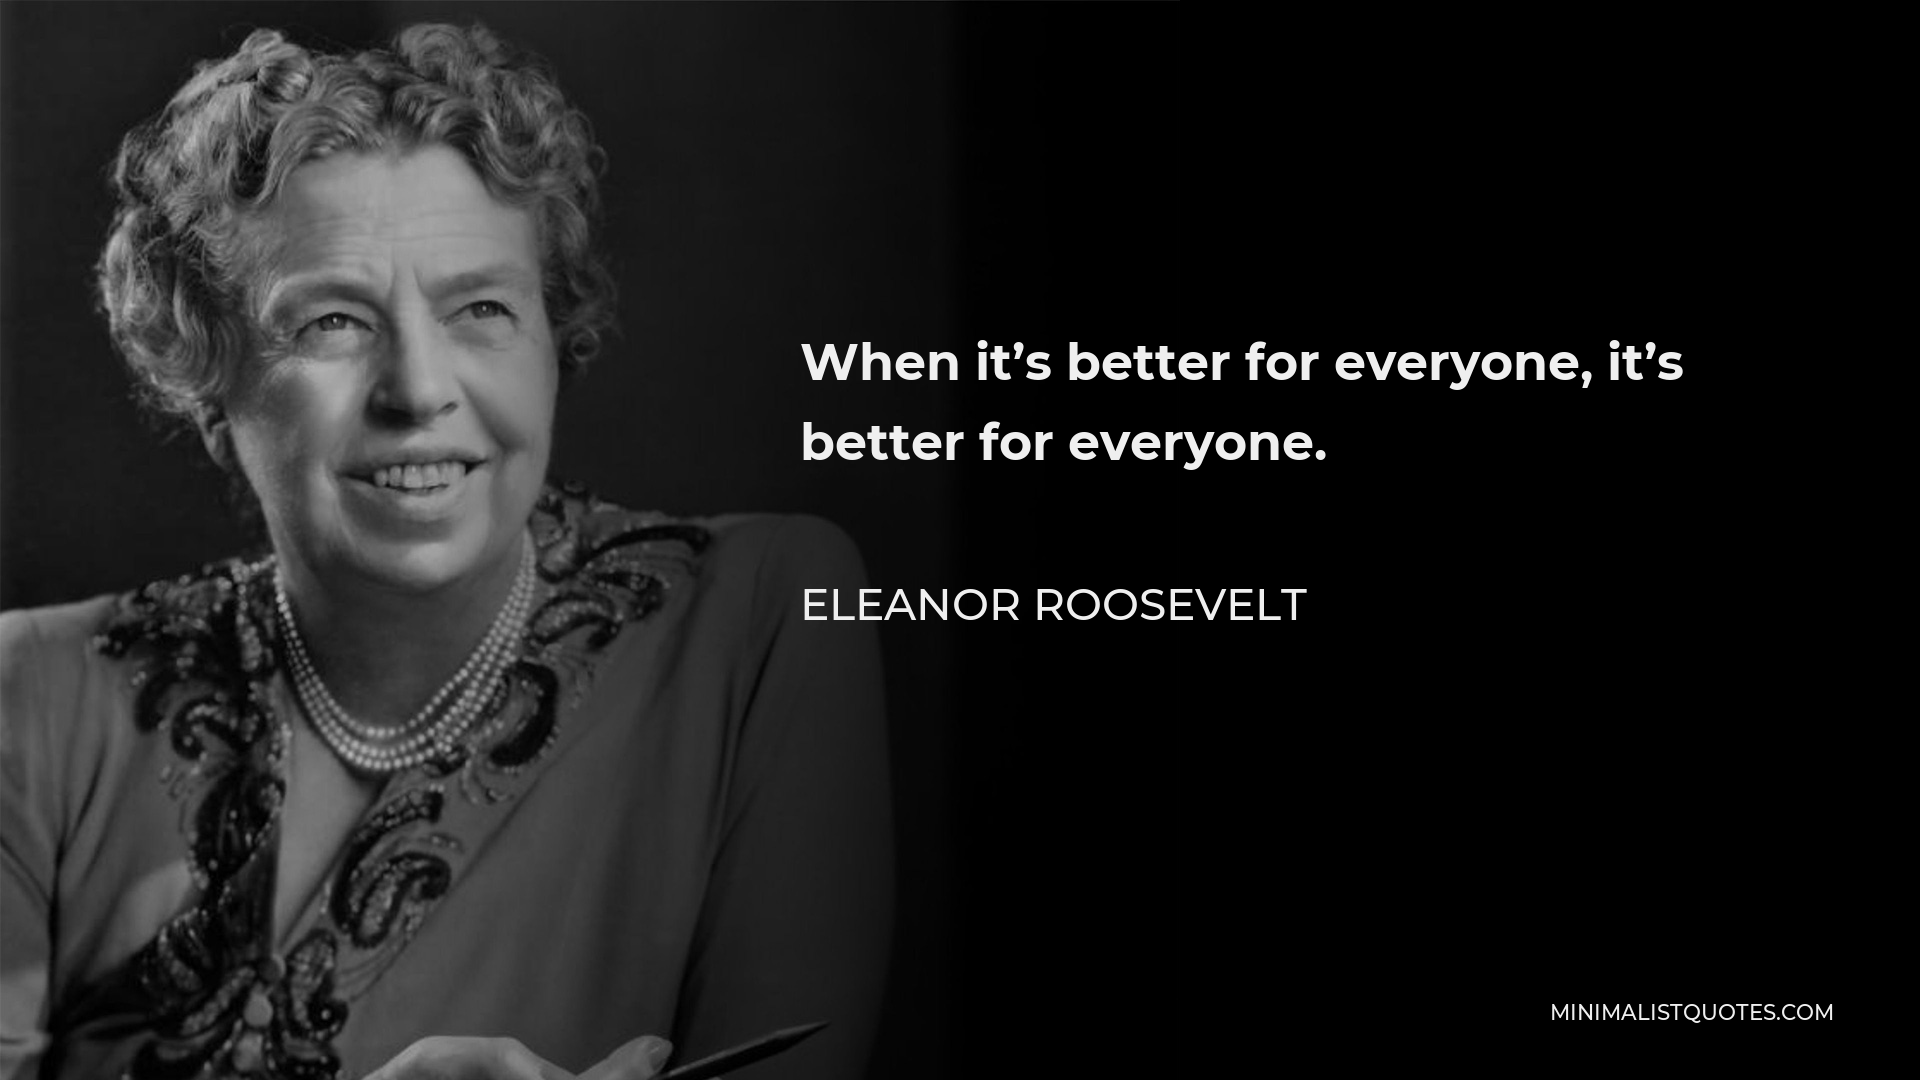 Eleanor Roosevelt Quote - When it’s better for everyone, it’s better for everyone.